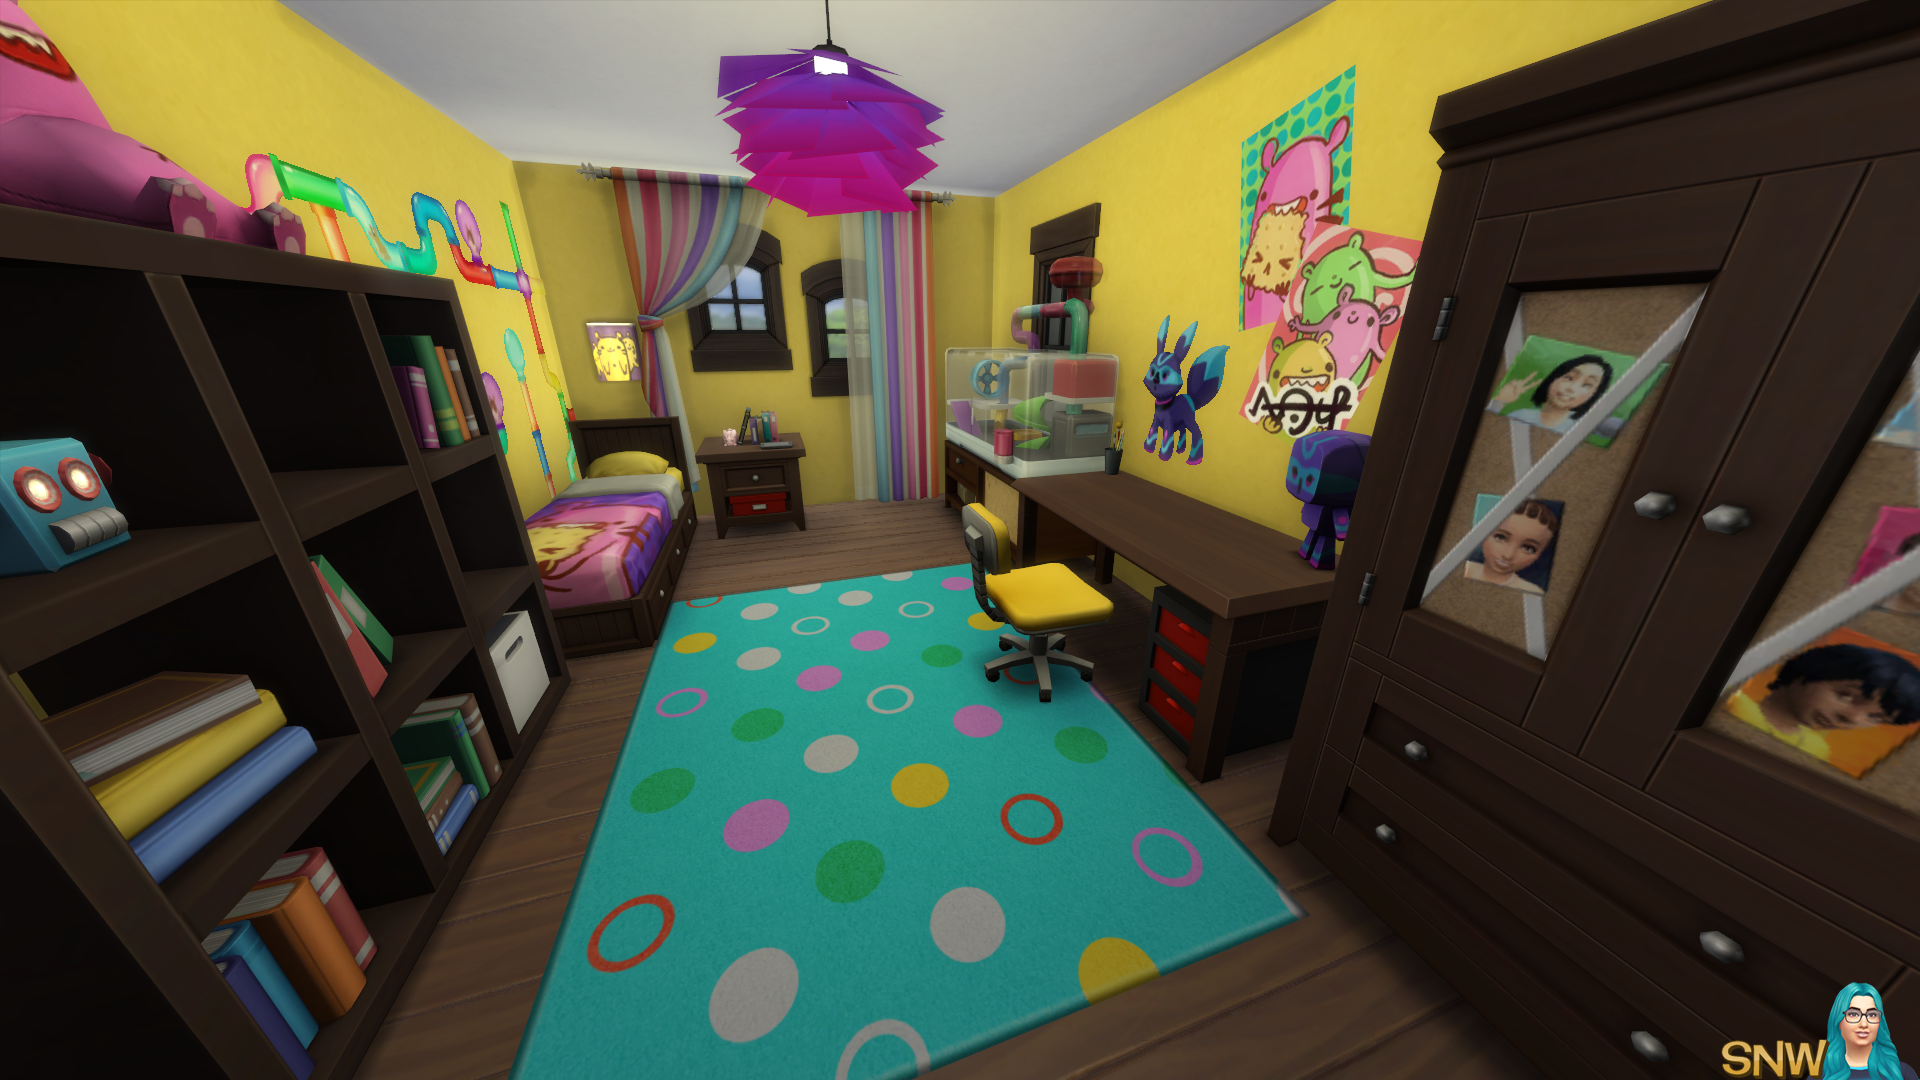 Fun &amp; Quirky house in The Sims 4